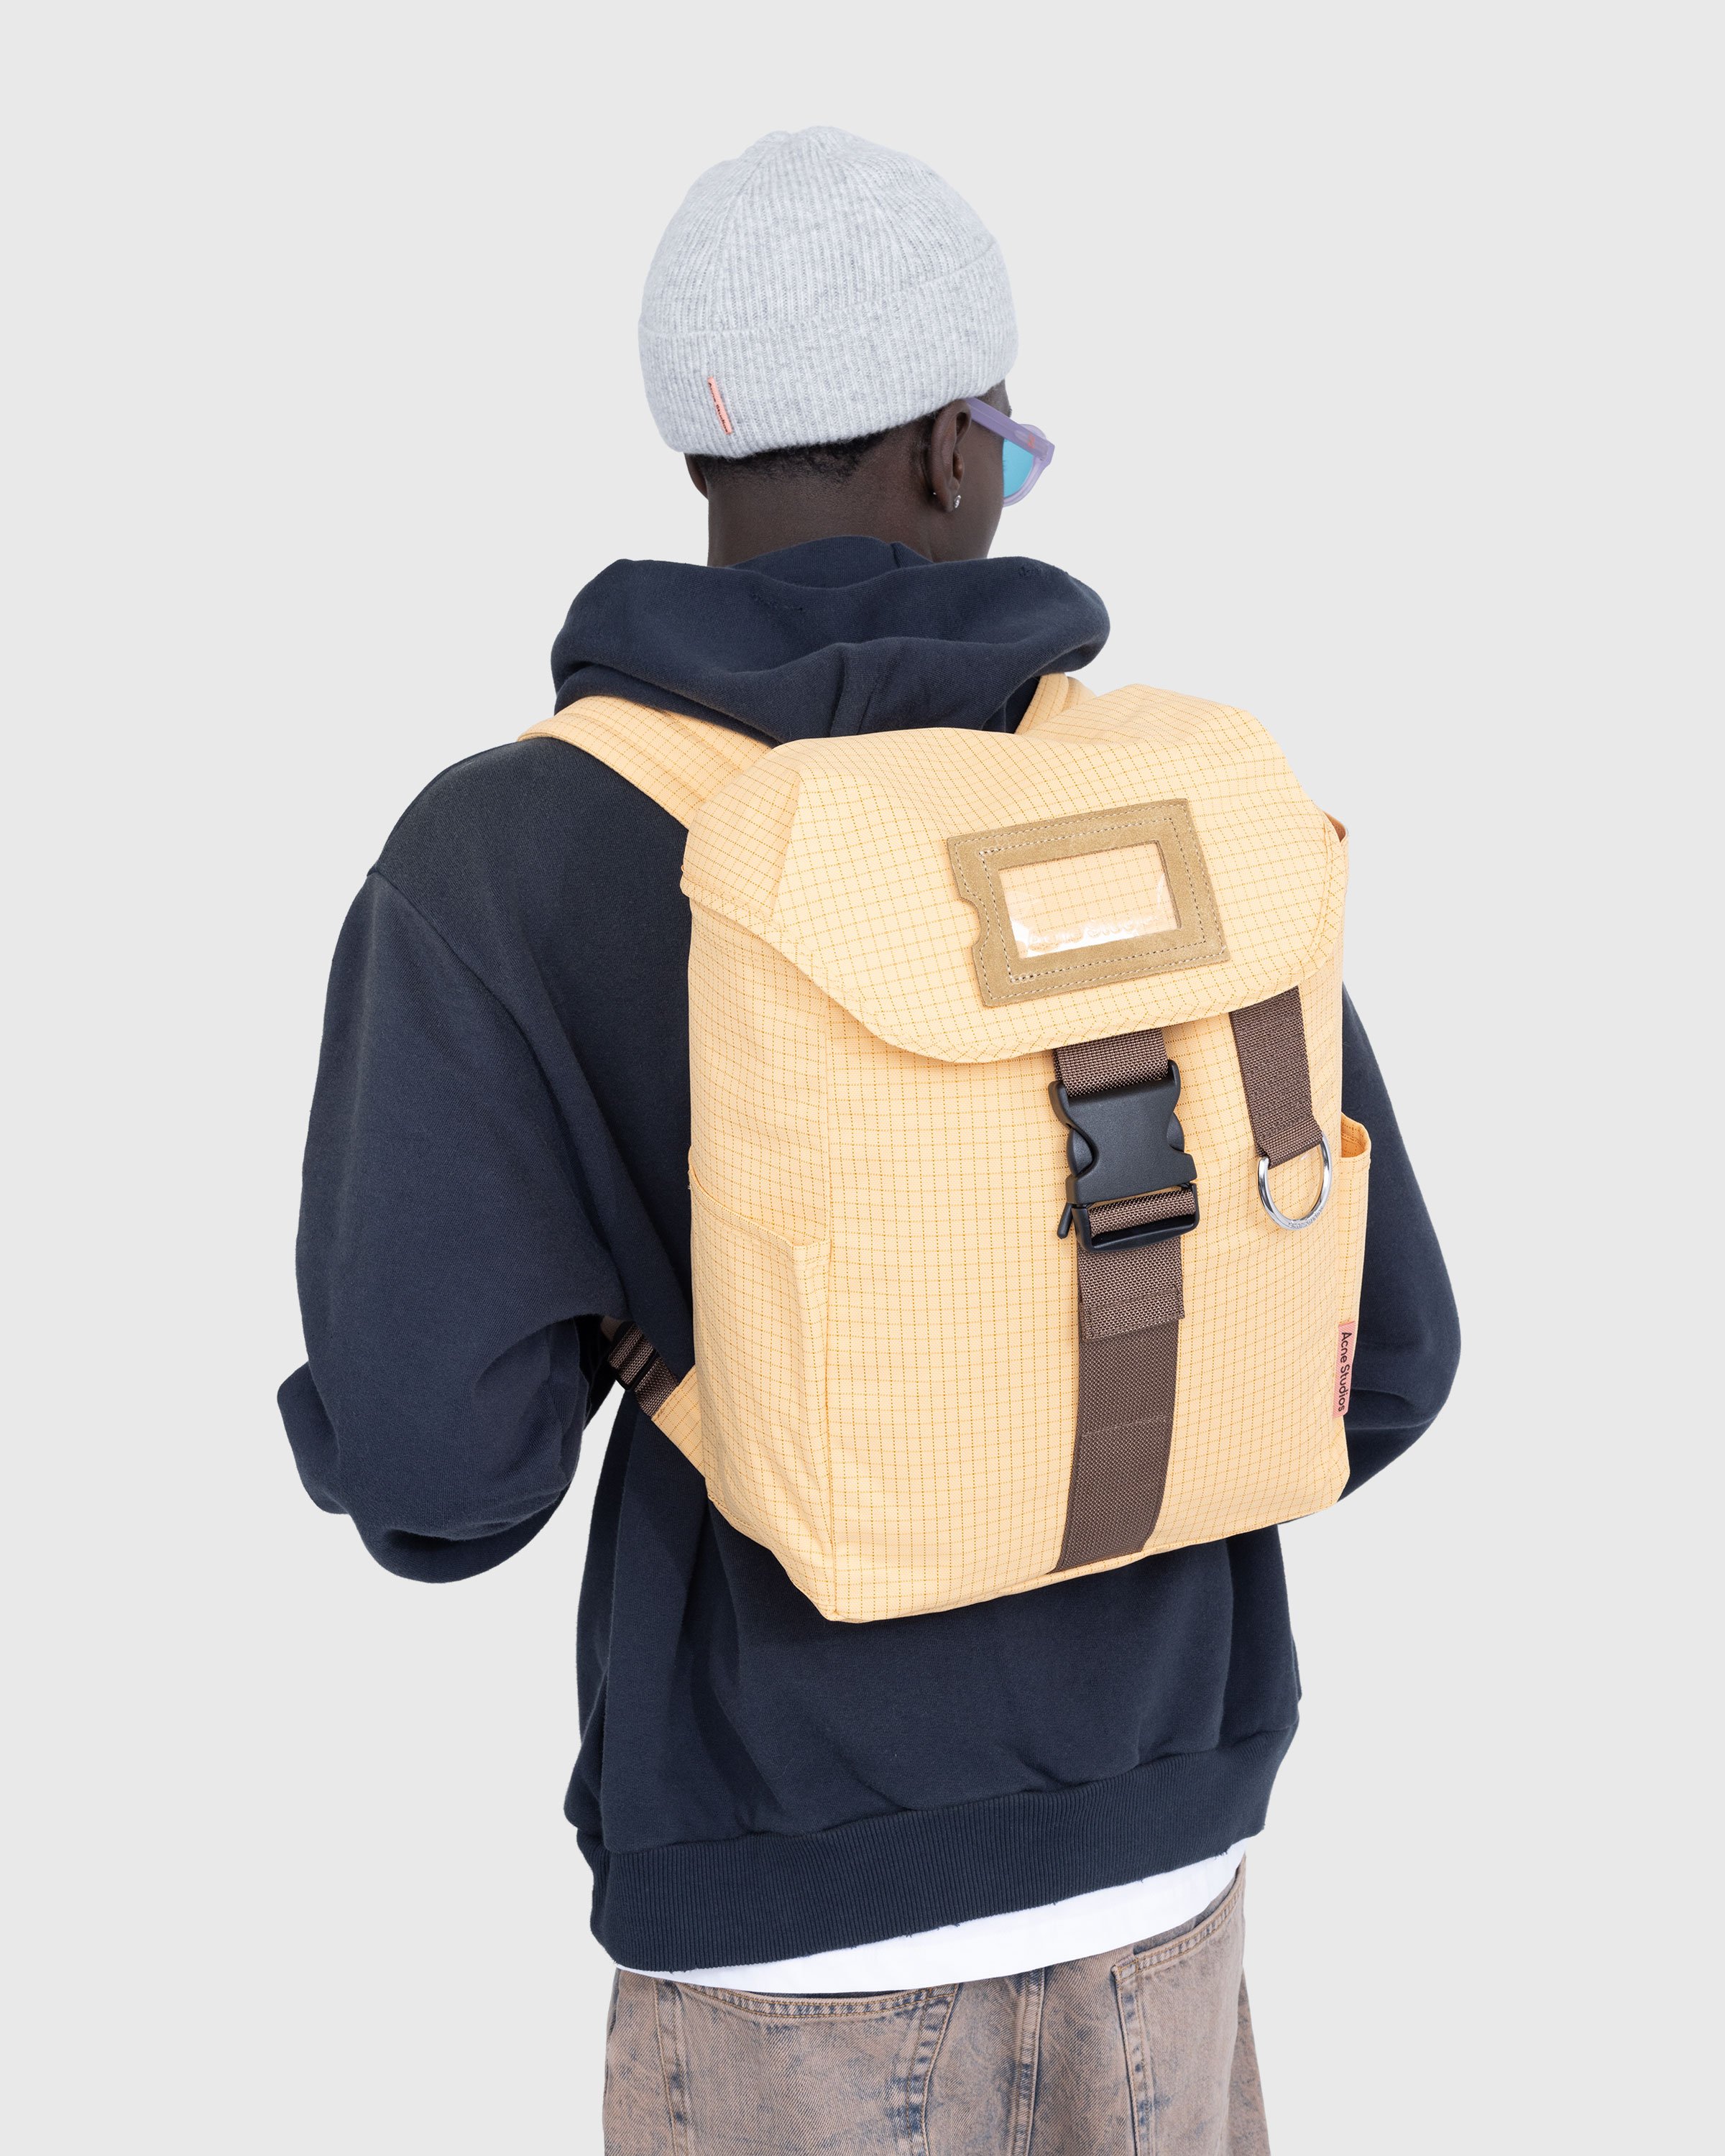 Acne Studios - Ripstop Nylon Backpack Yellow/Brown - Accessories - Multi - Image 4